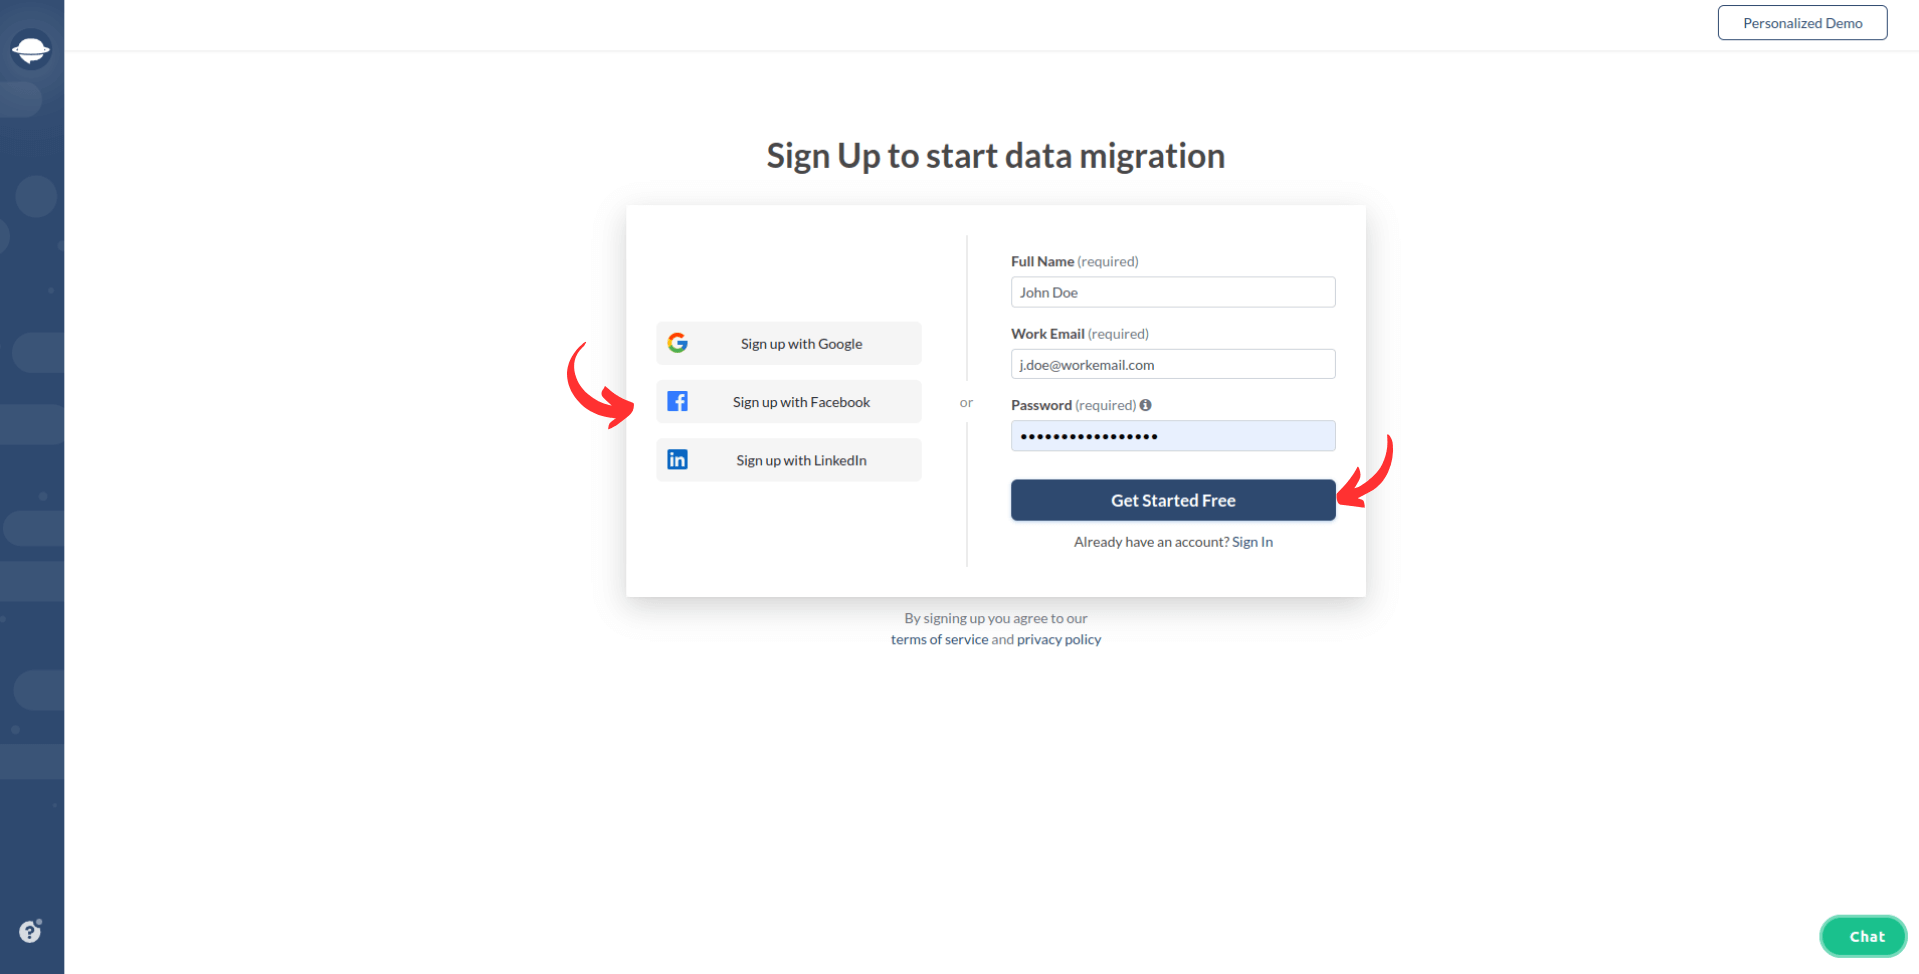 Migration Wizard - Sign Up Options